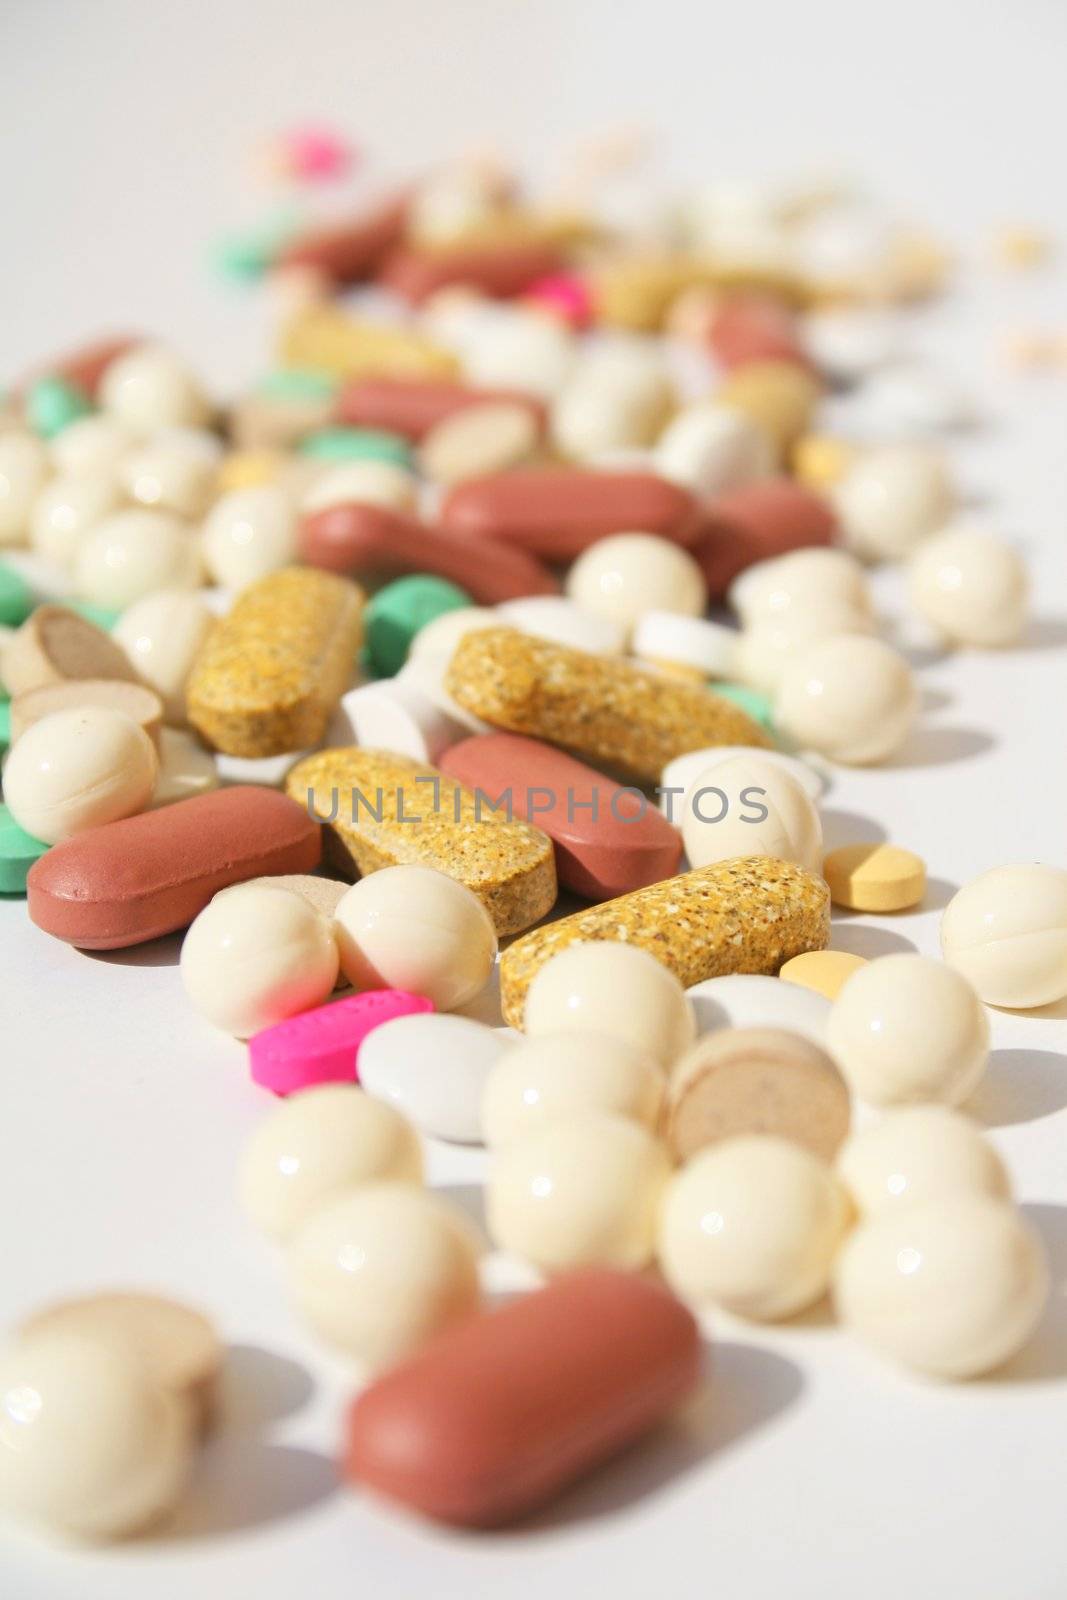 Various pills against white background with shallow depth of field on background